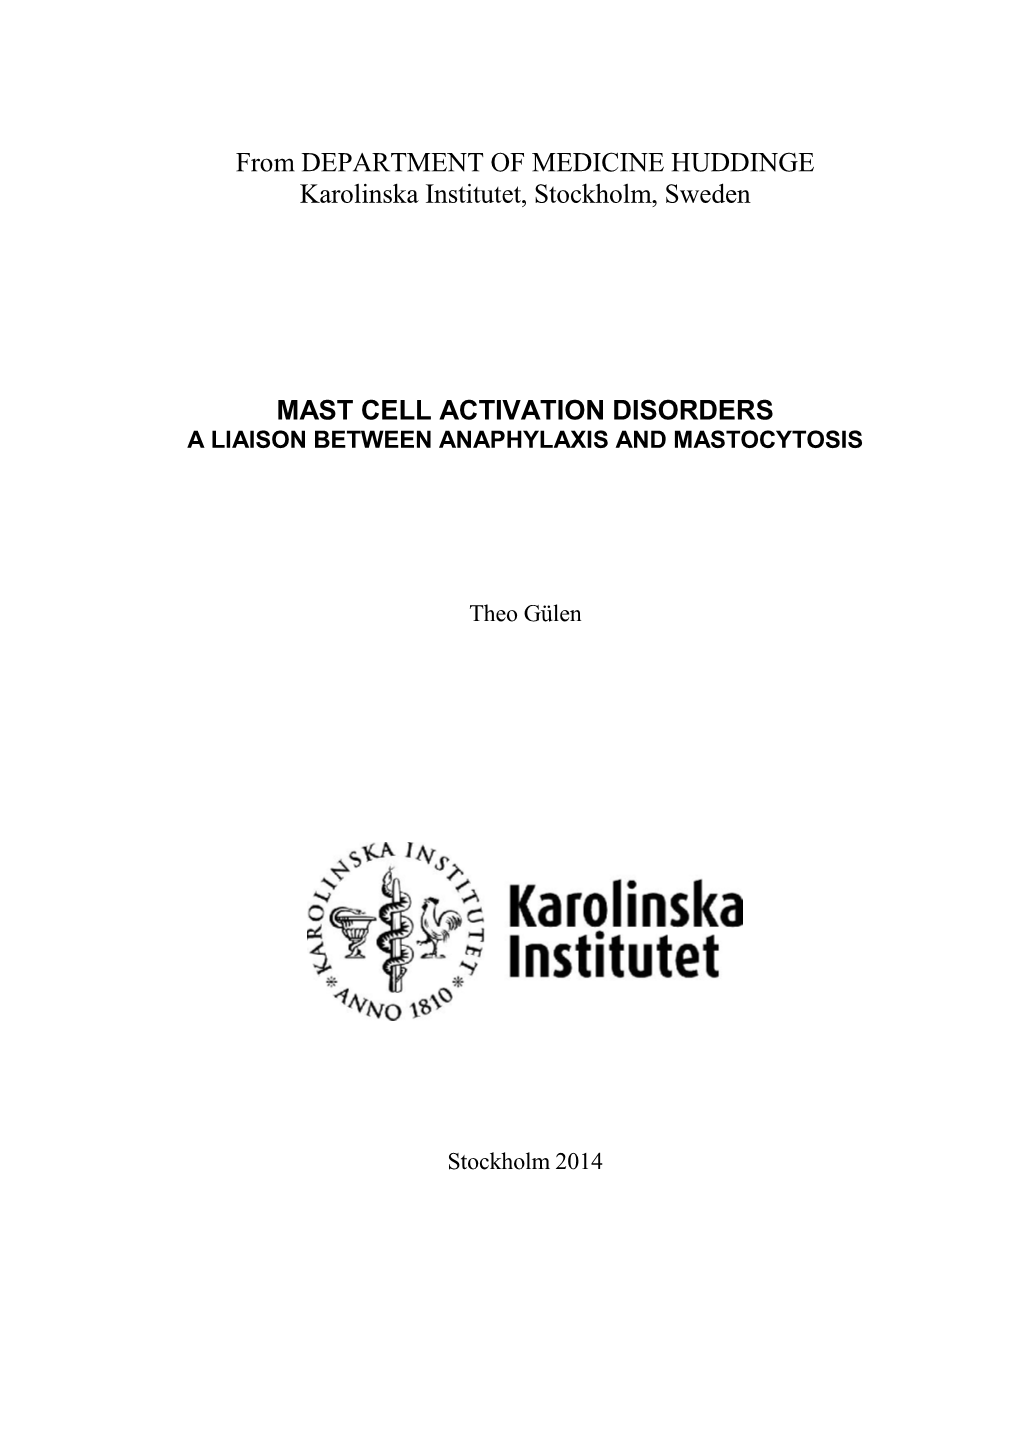 Mast Cell Activation Disorders a Liaison Between Anaphylaxis and Mastocytosis